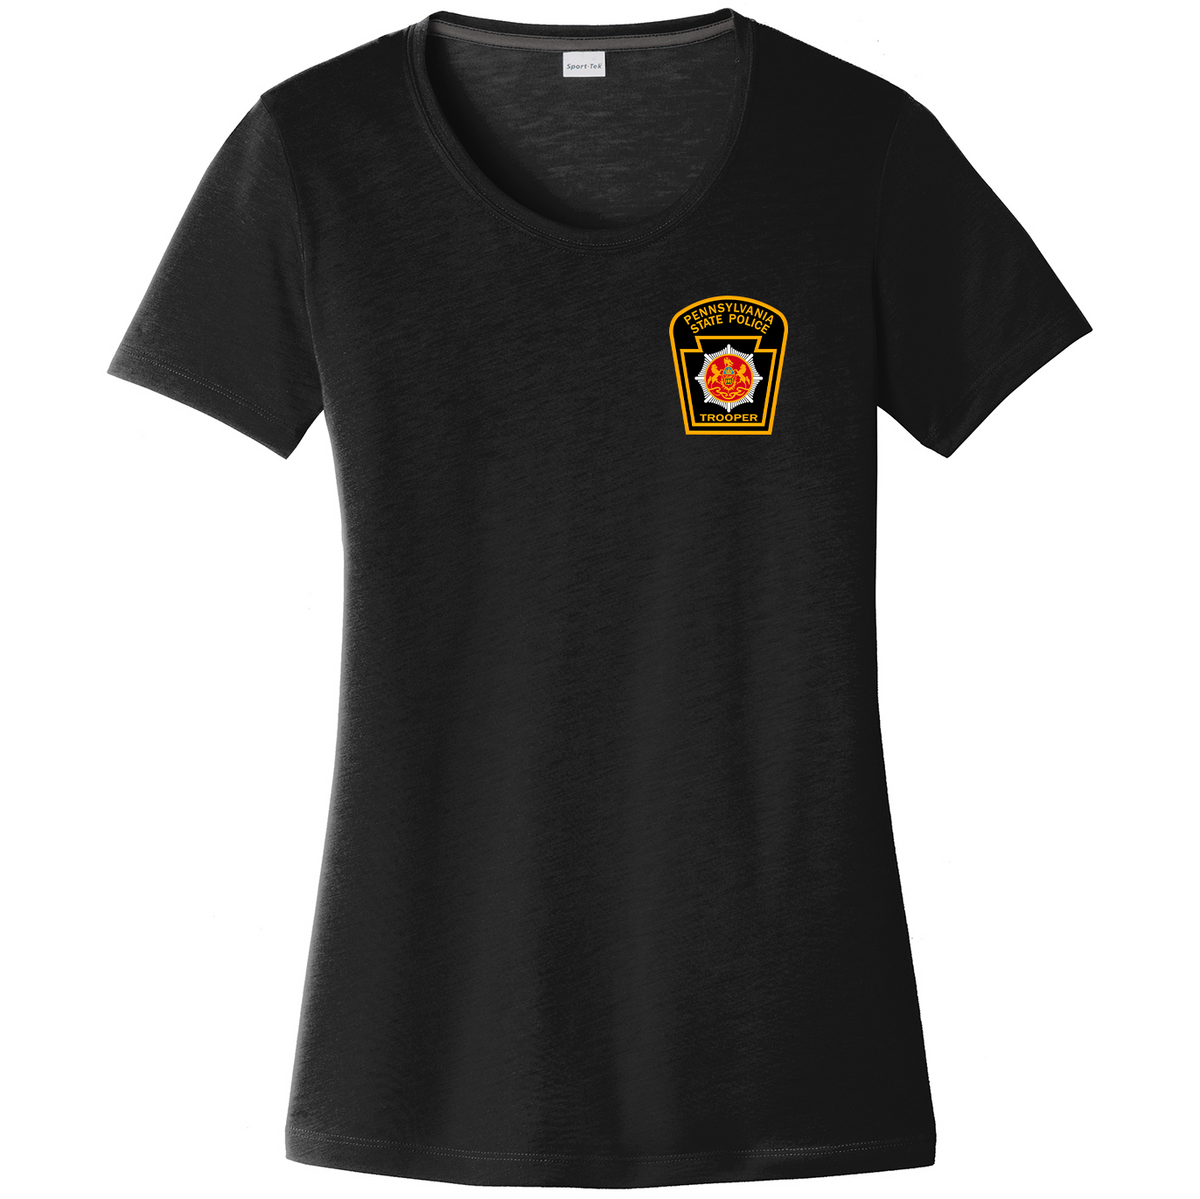 PA State Police Women's CottonTouch Performance T-Shirt